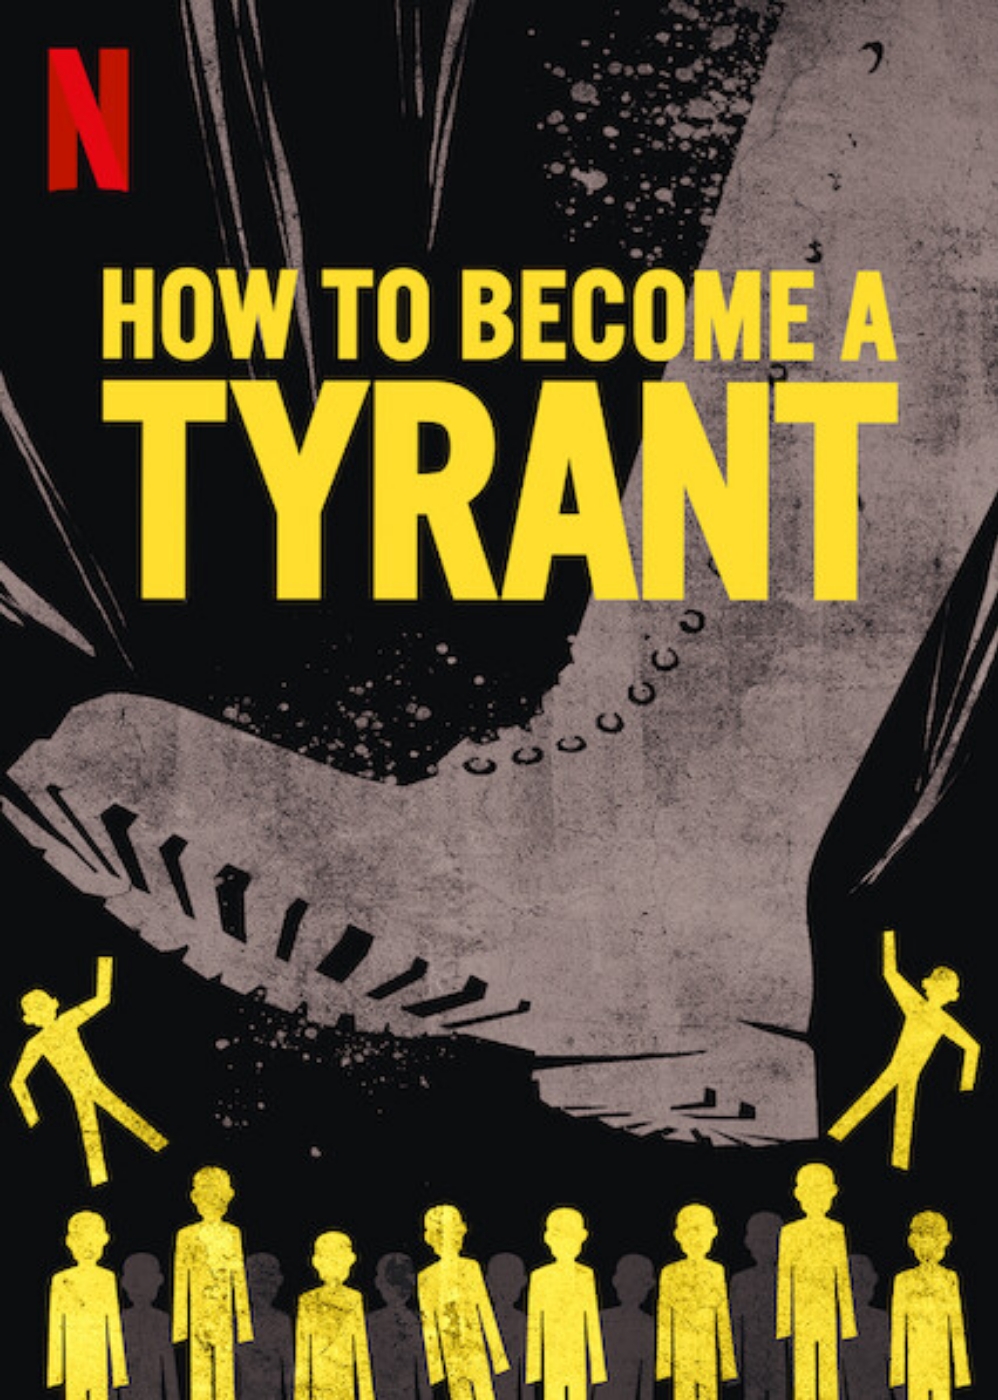 The Netflix documentary 'How To Become A Tyrant' reveals secrets infamous dictators exploited to seize and cling to power